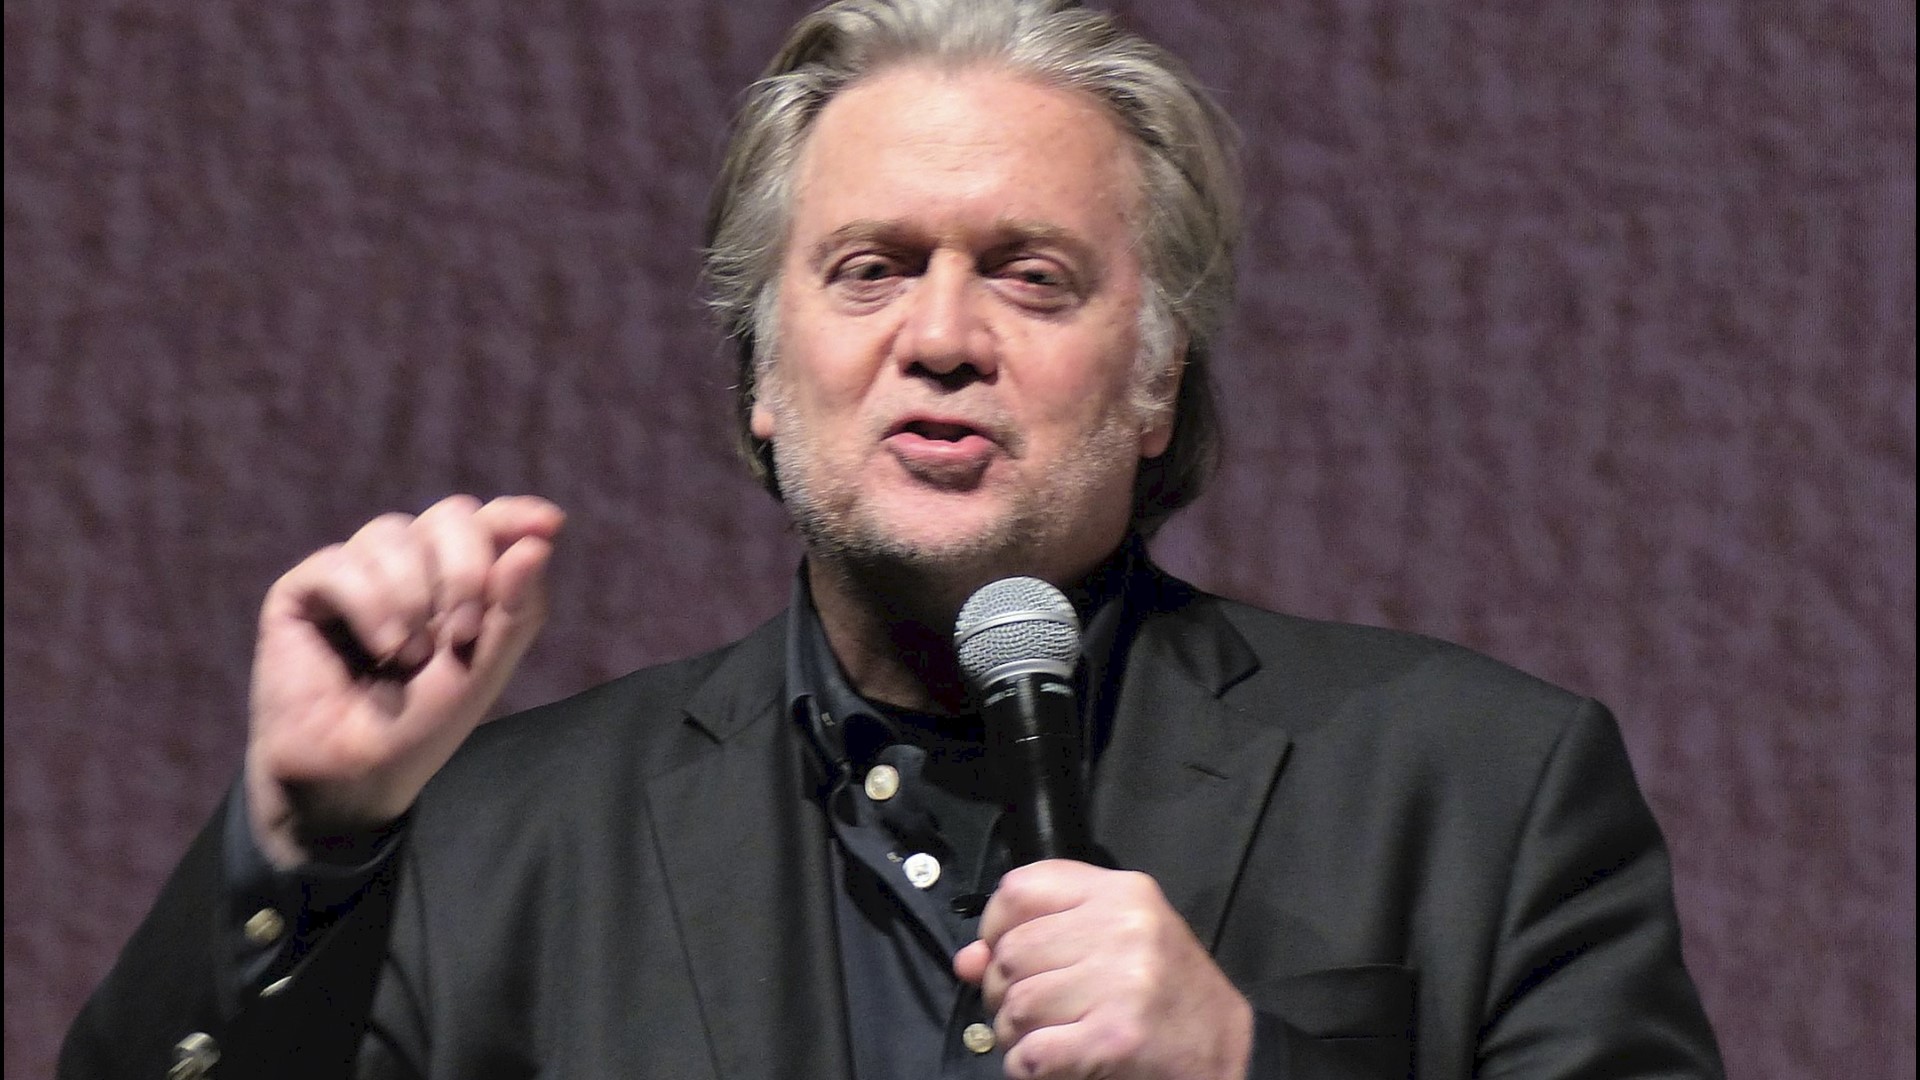 President Trump's former White House strategist Steve Bannon and three others were arrested on charges that they defrauded hundreds of thousands of donors pledging money for a private border wall. Veuer's Justin Kircher has the story.